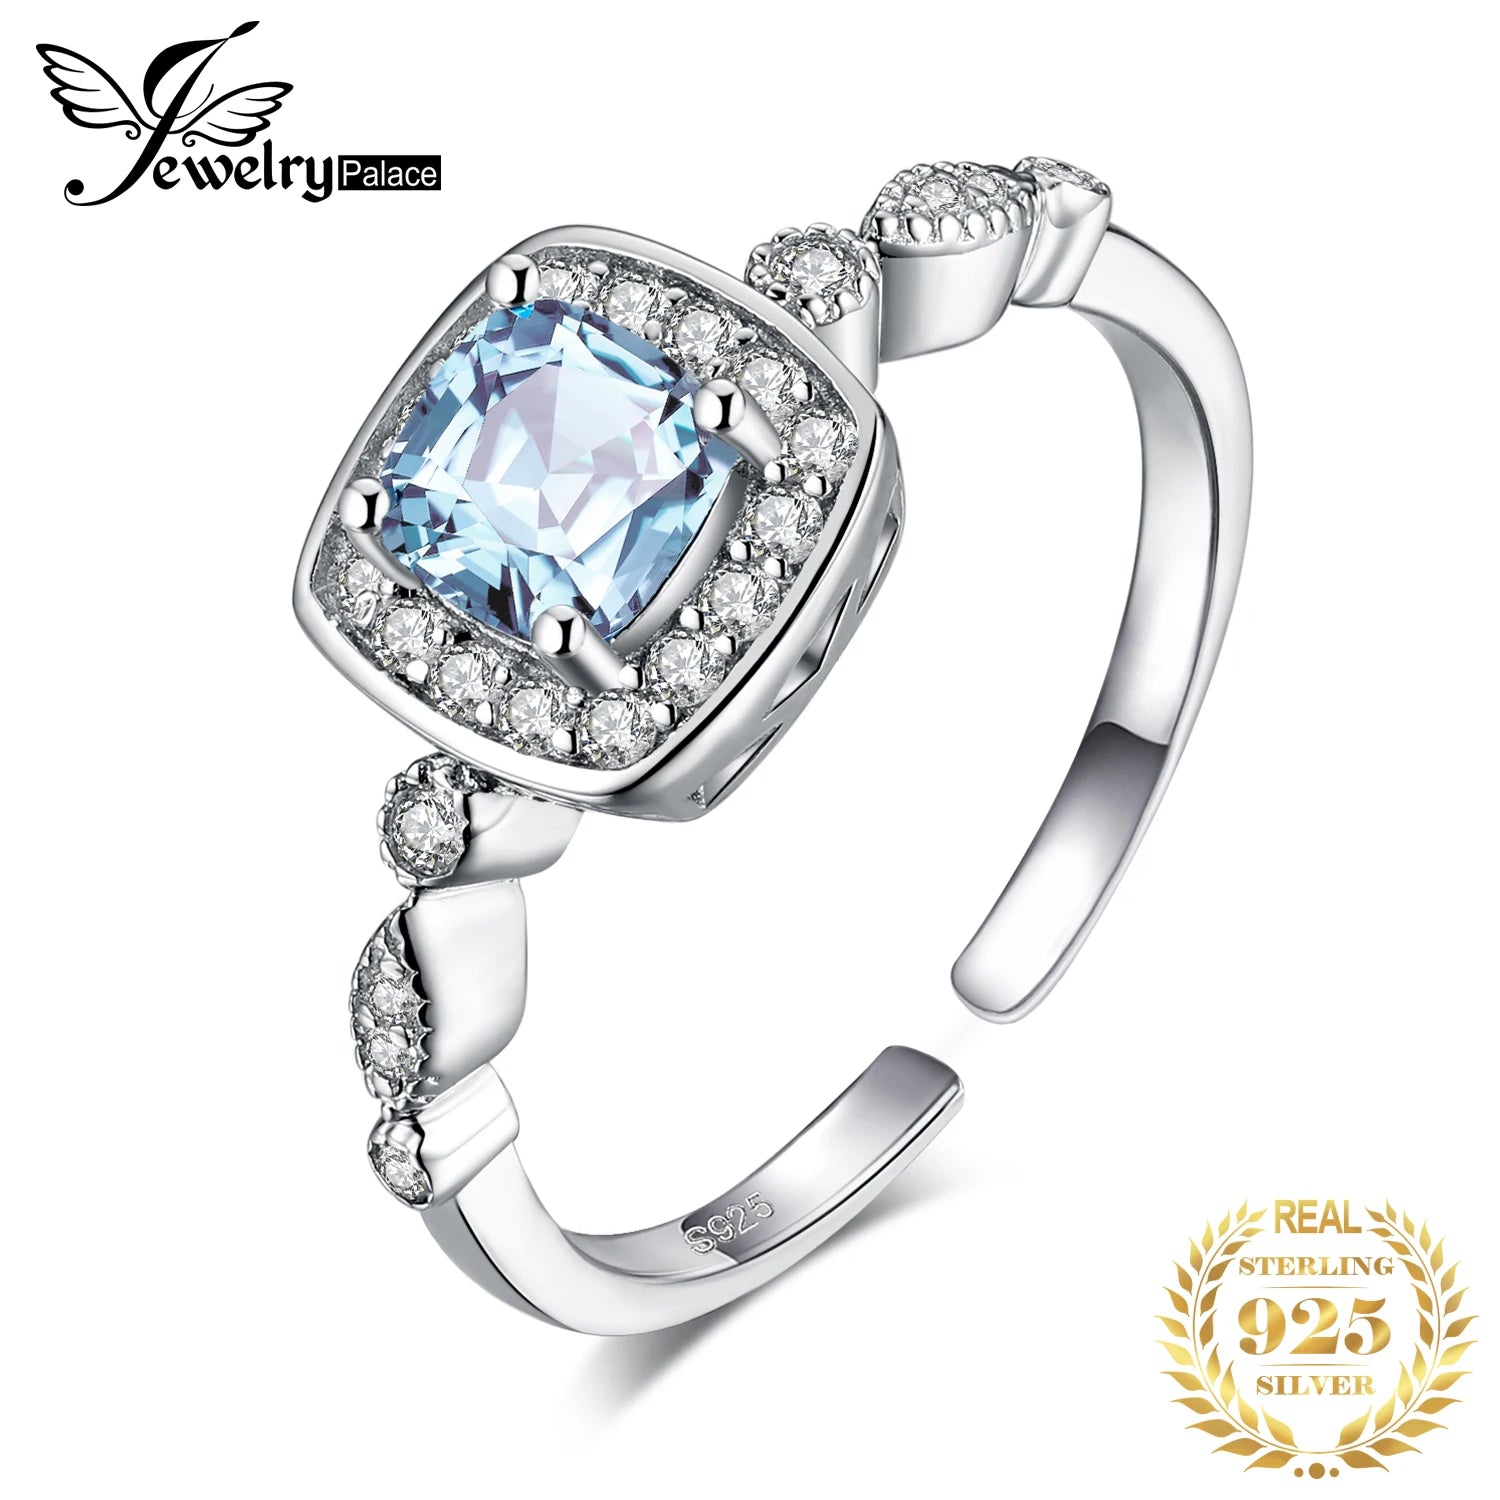 JewelryPalace Genuine Blue Topaz 925 Sterling Silver Ring Open Adjustable Promise Halo Engagement Ring for Women Jewelry